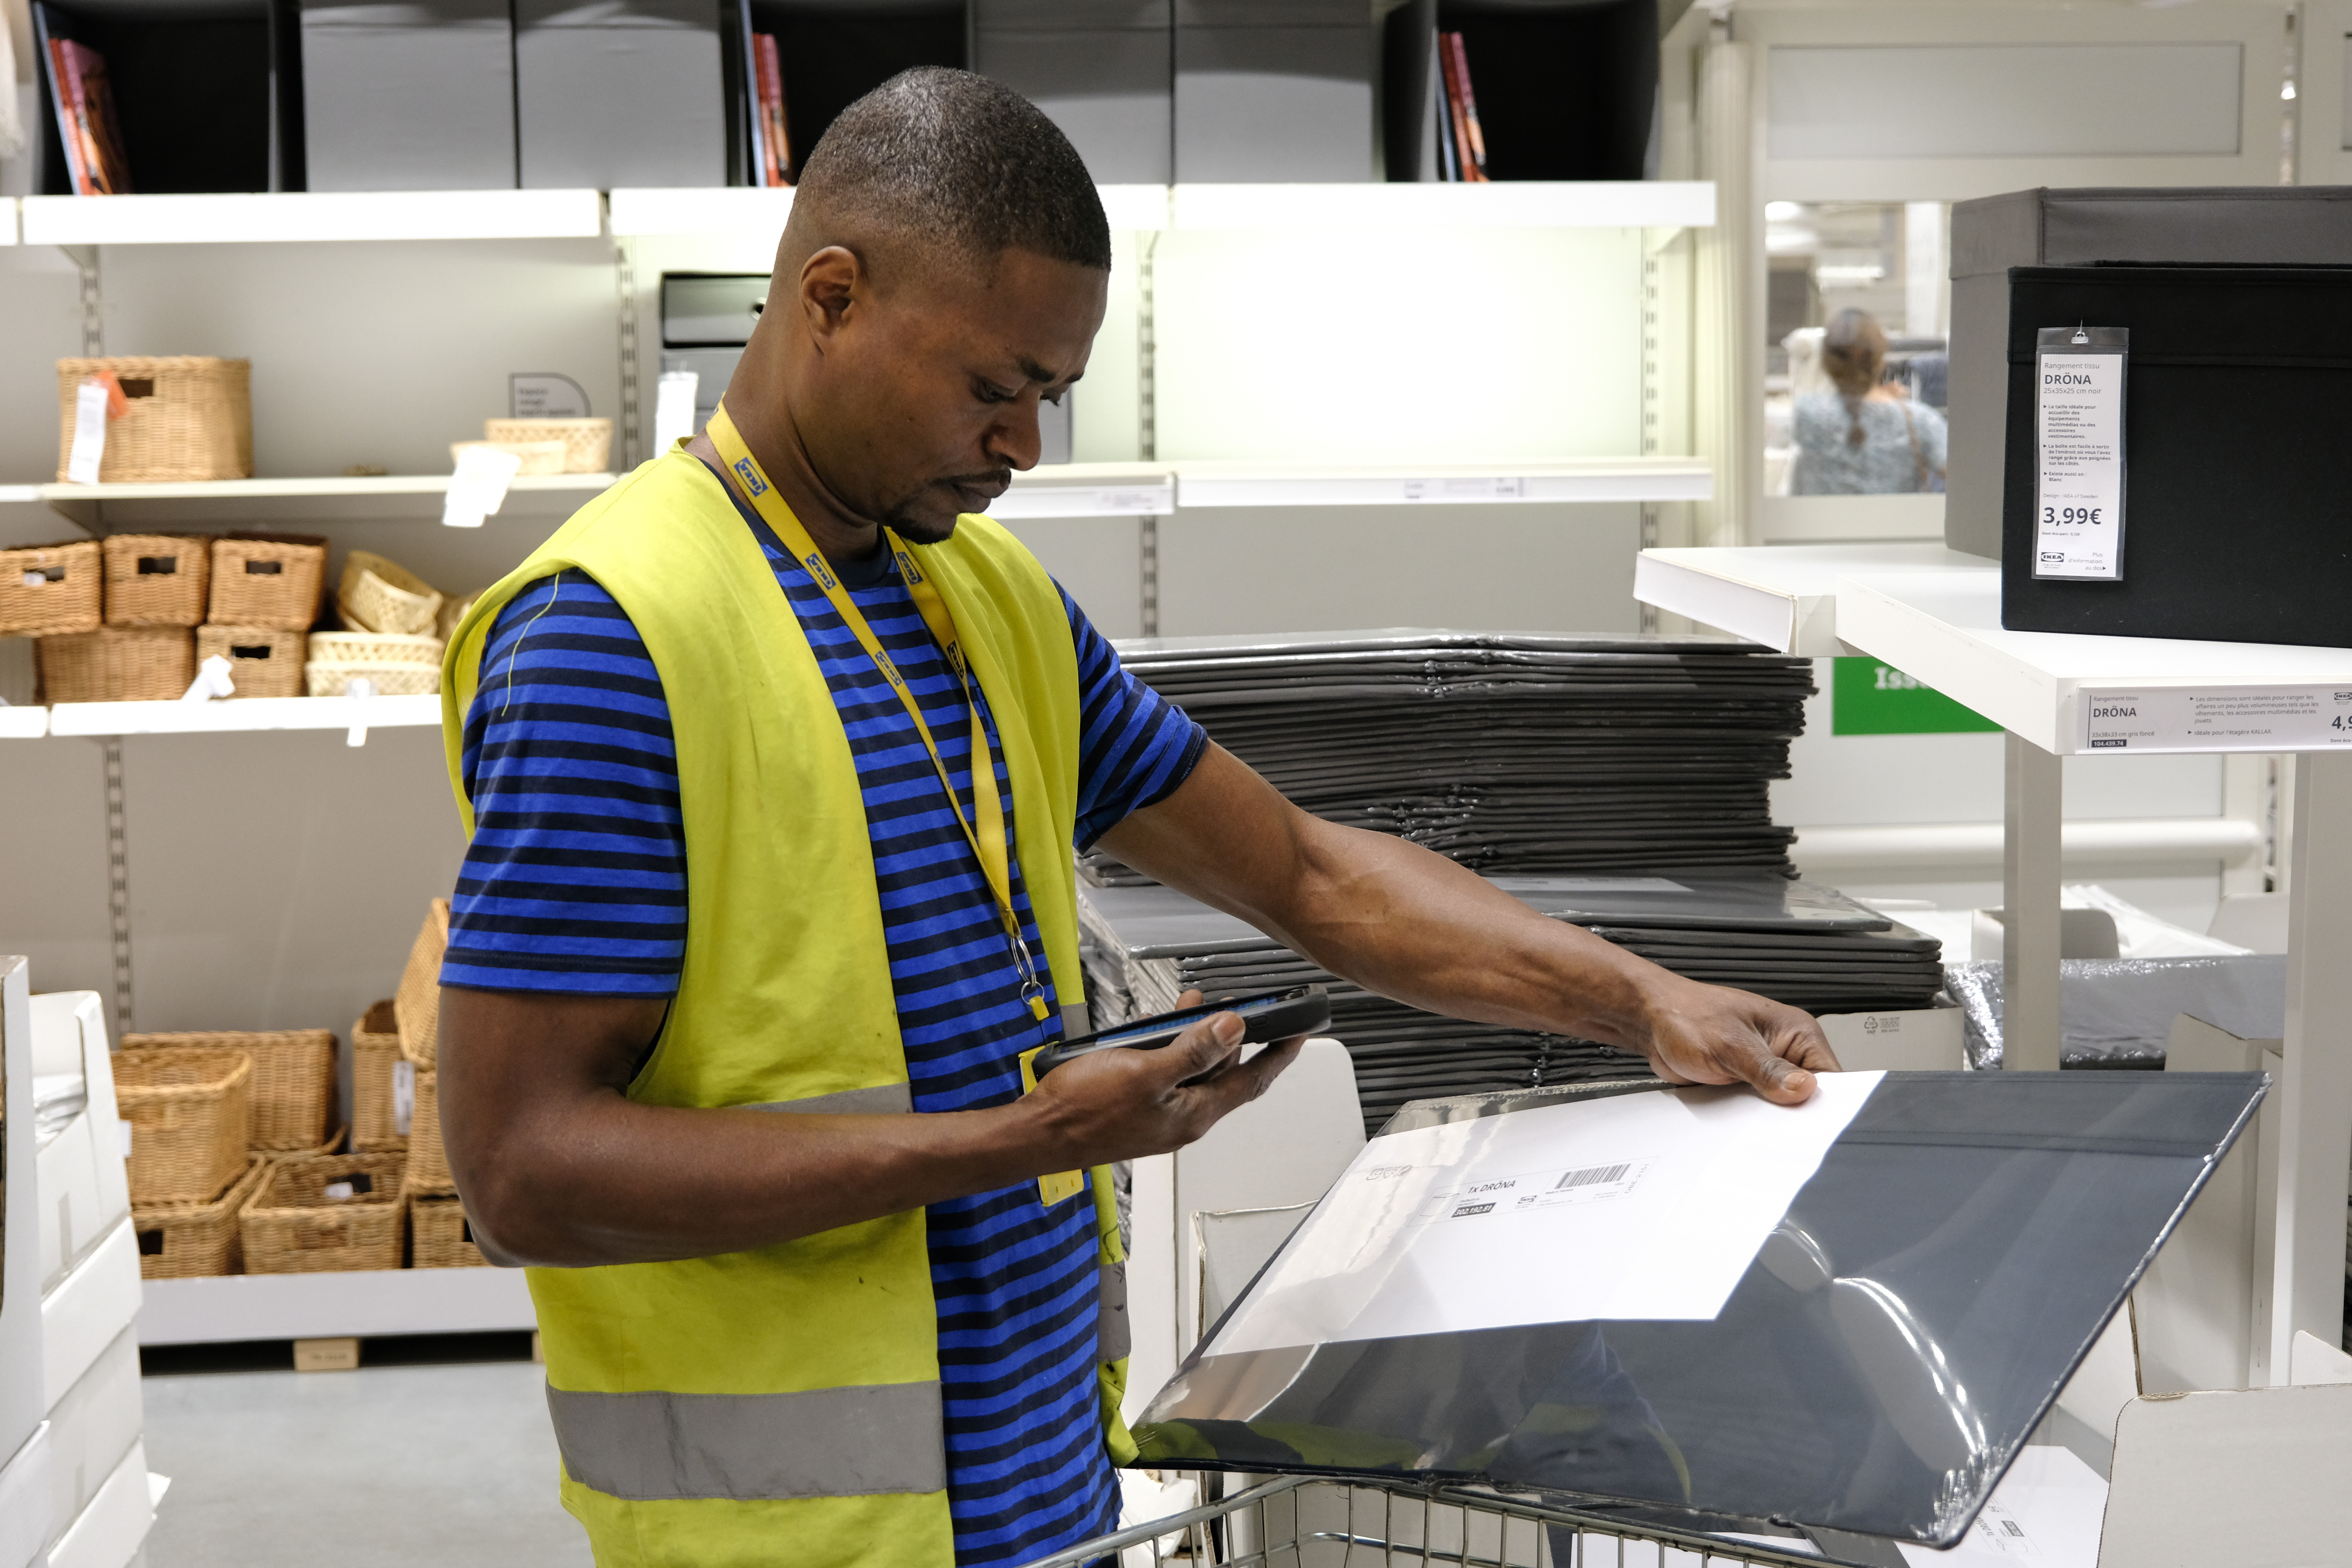 Dady, a Congolese refugee who fled his country due to armed conflict, is now an order picker at Ikea in Reims, France. 